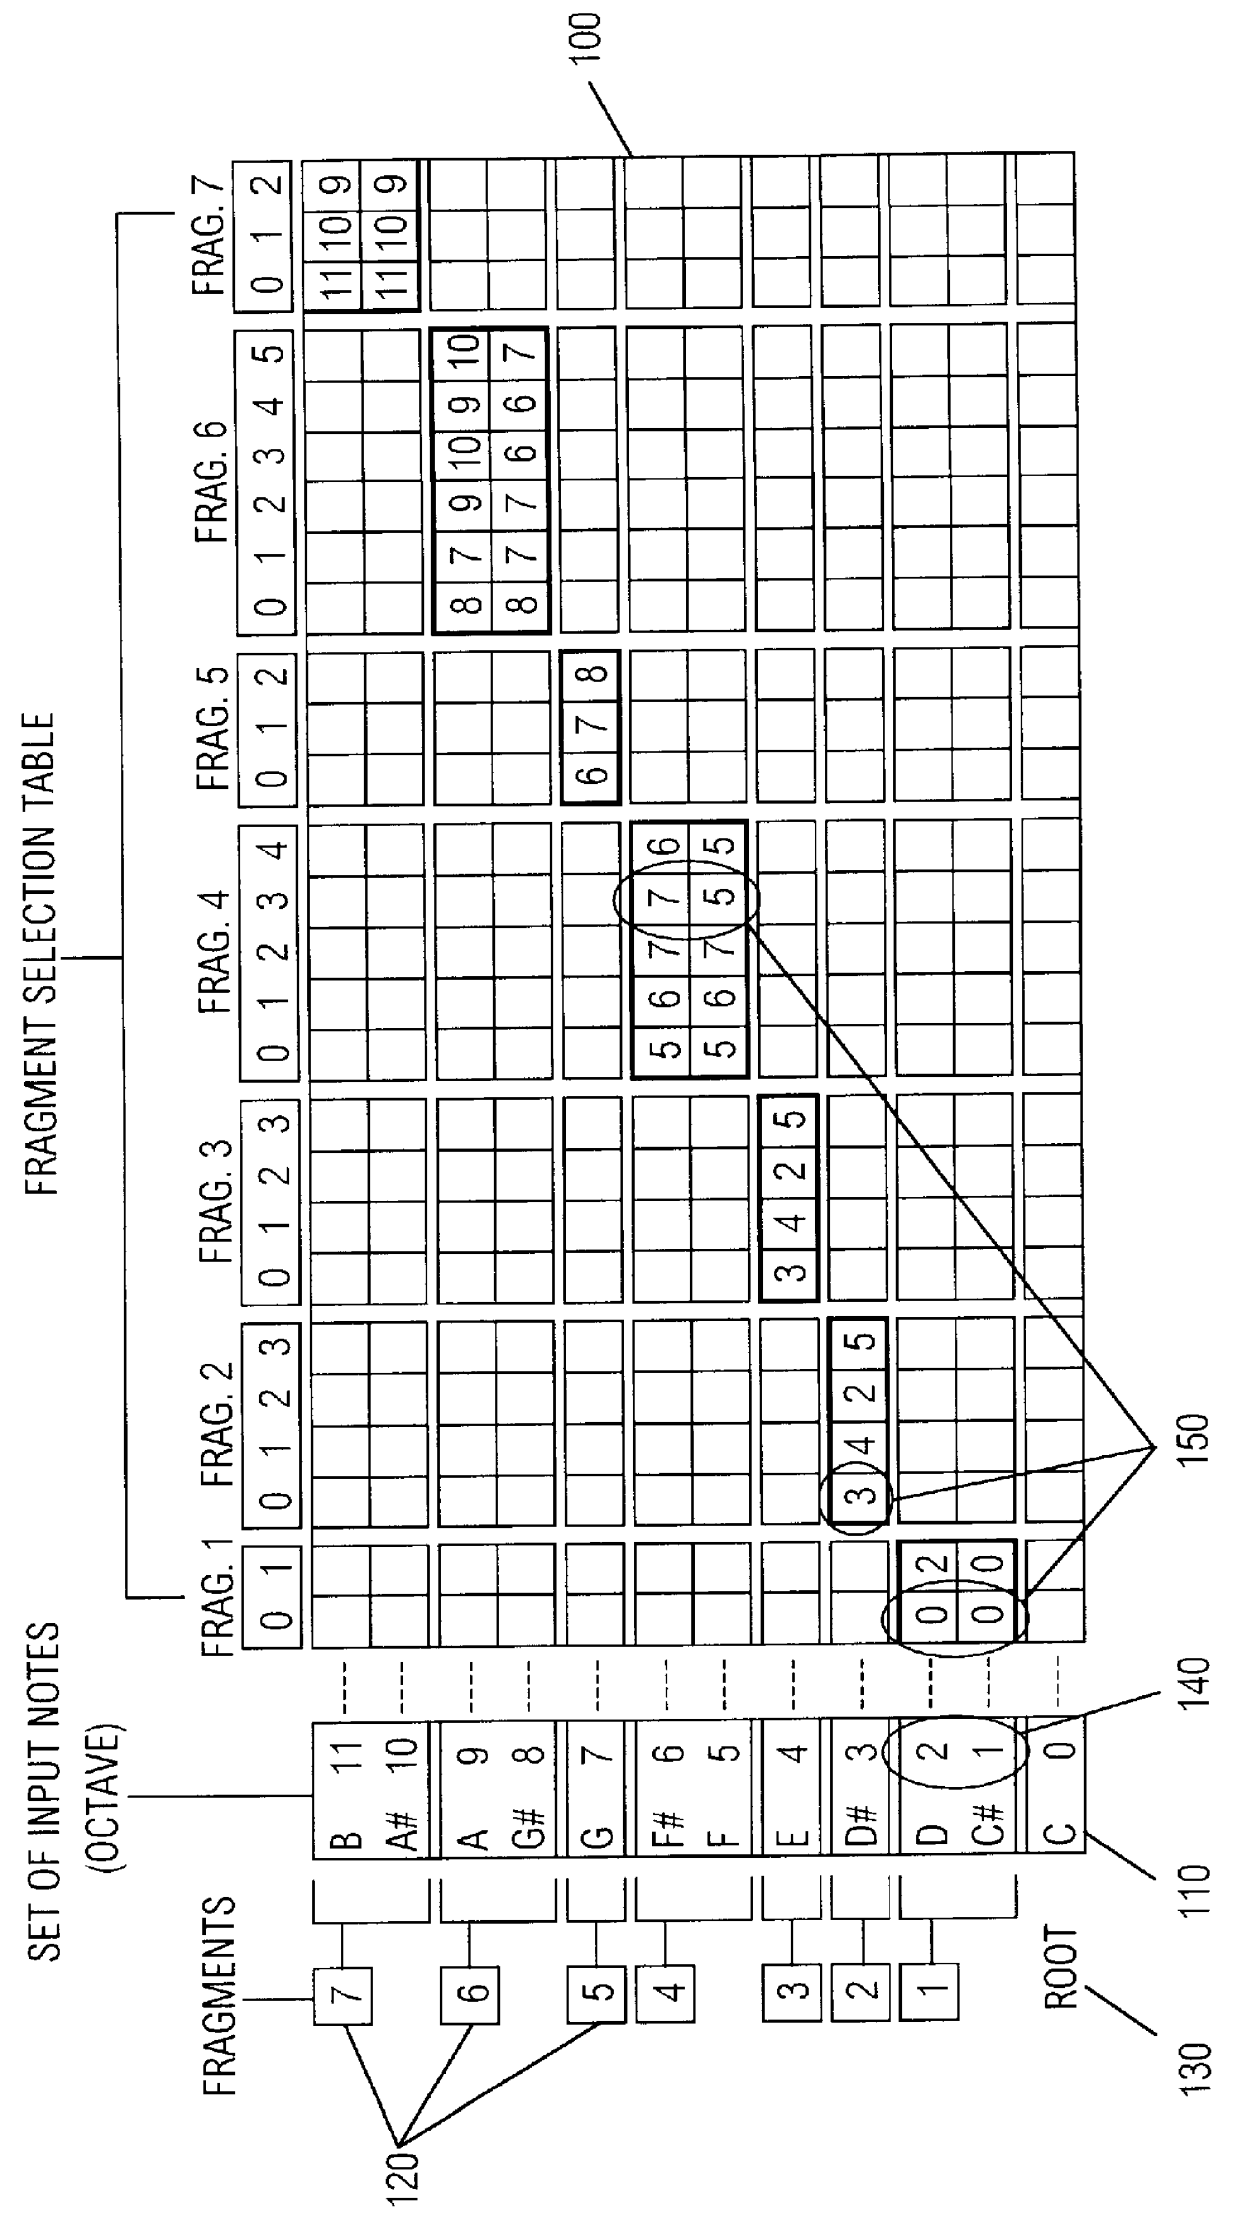 Method for dynamically assembling a conversion table